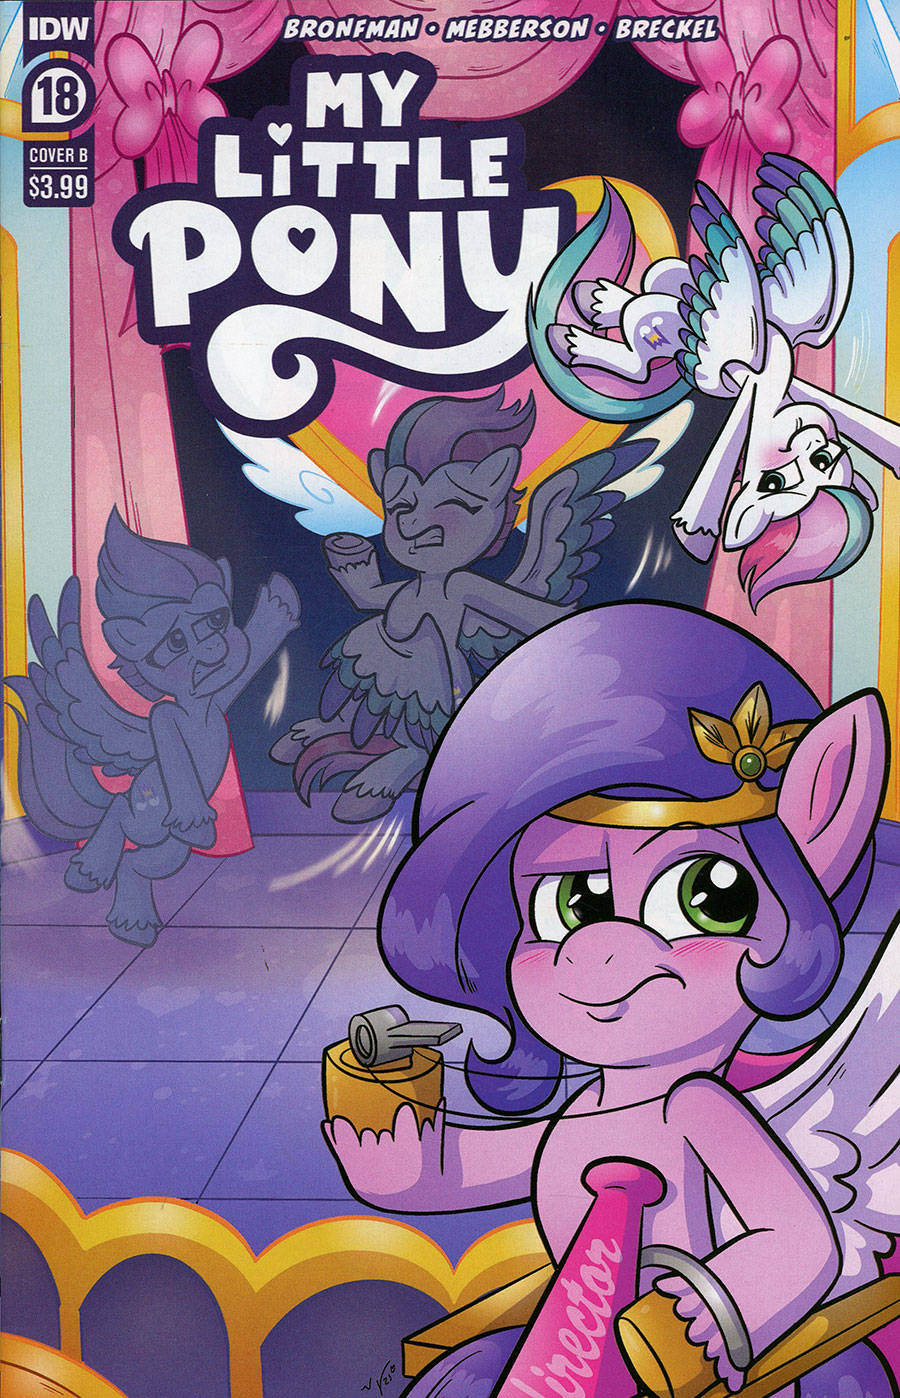 My Little Pony #18 Cover B Variant Mary Bellamy Cover